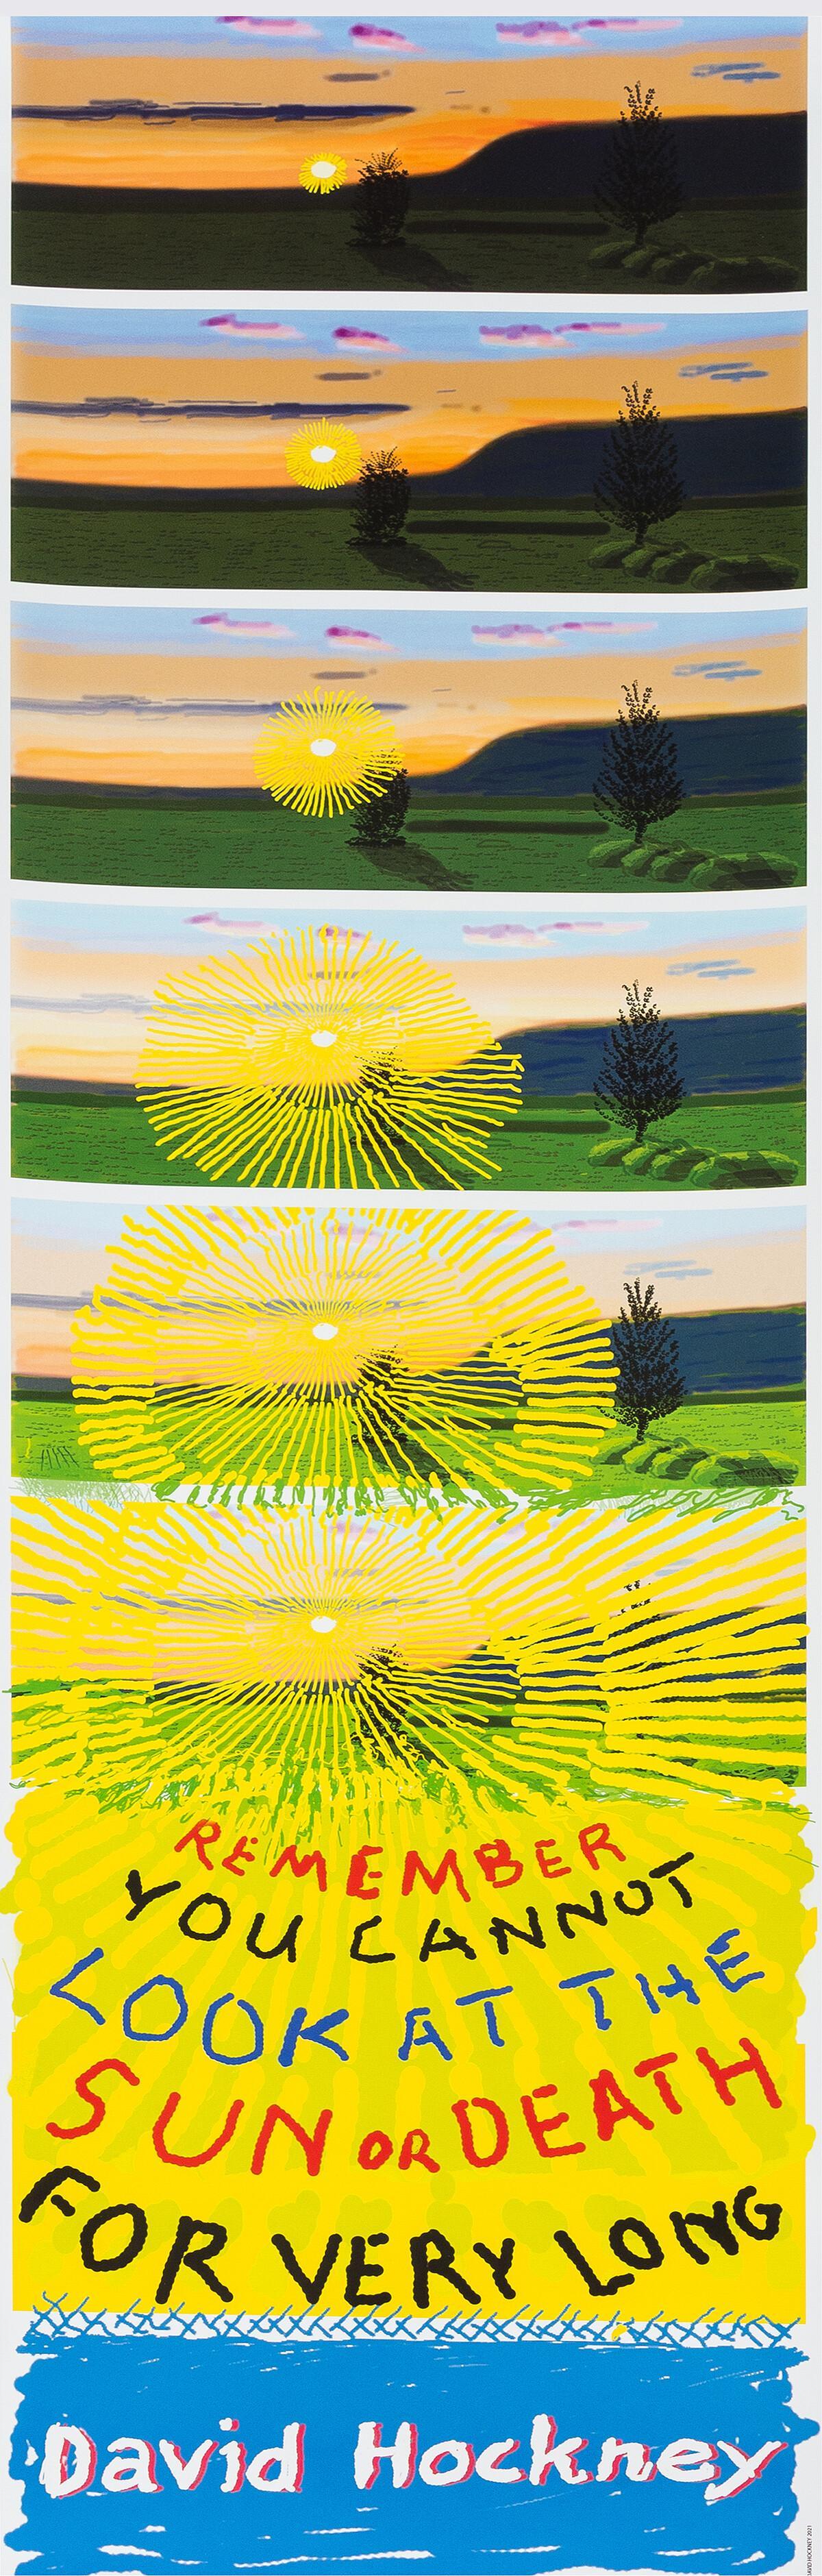 David Hockney Print - Remember That You Cannot Look At the Sun